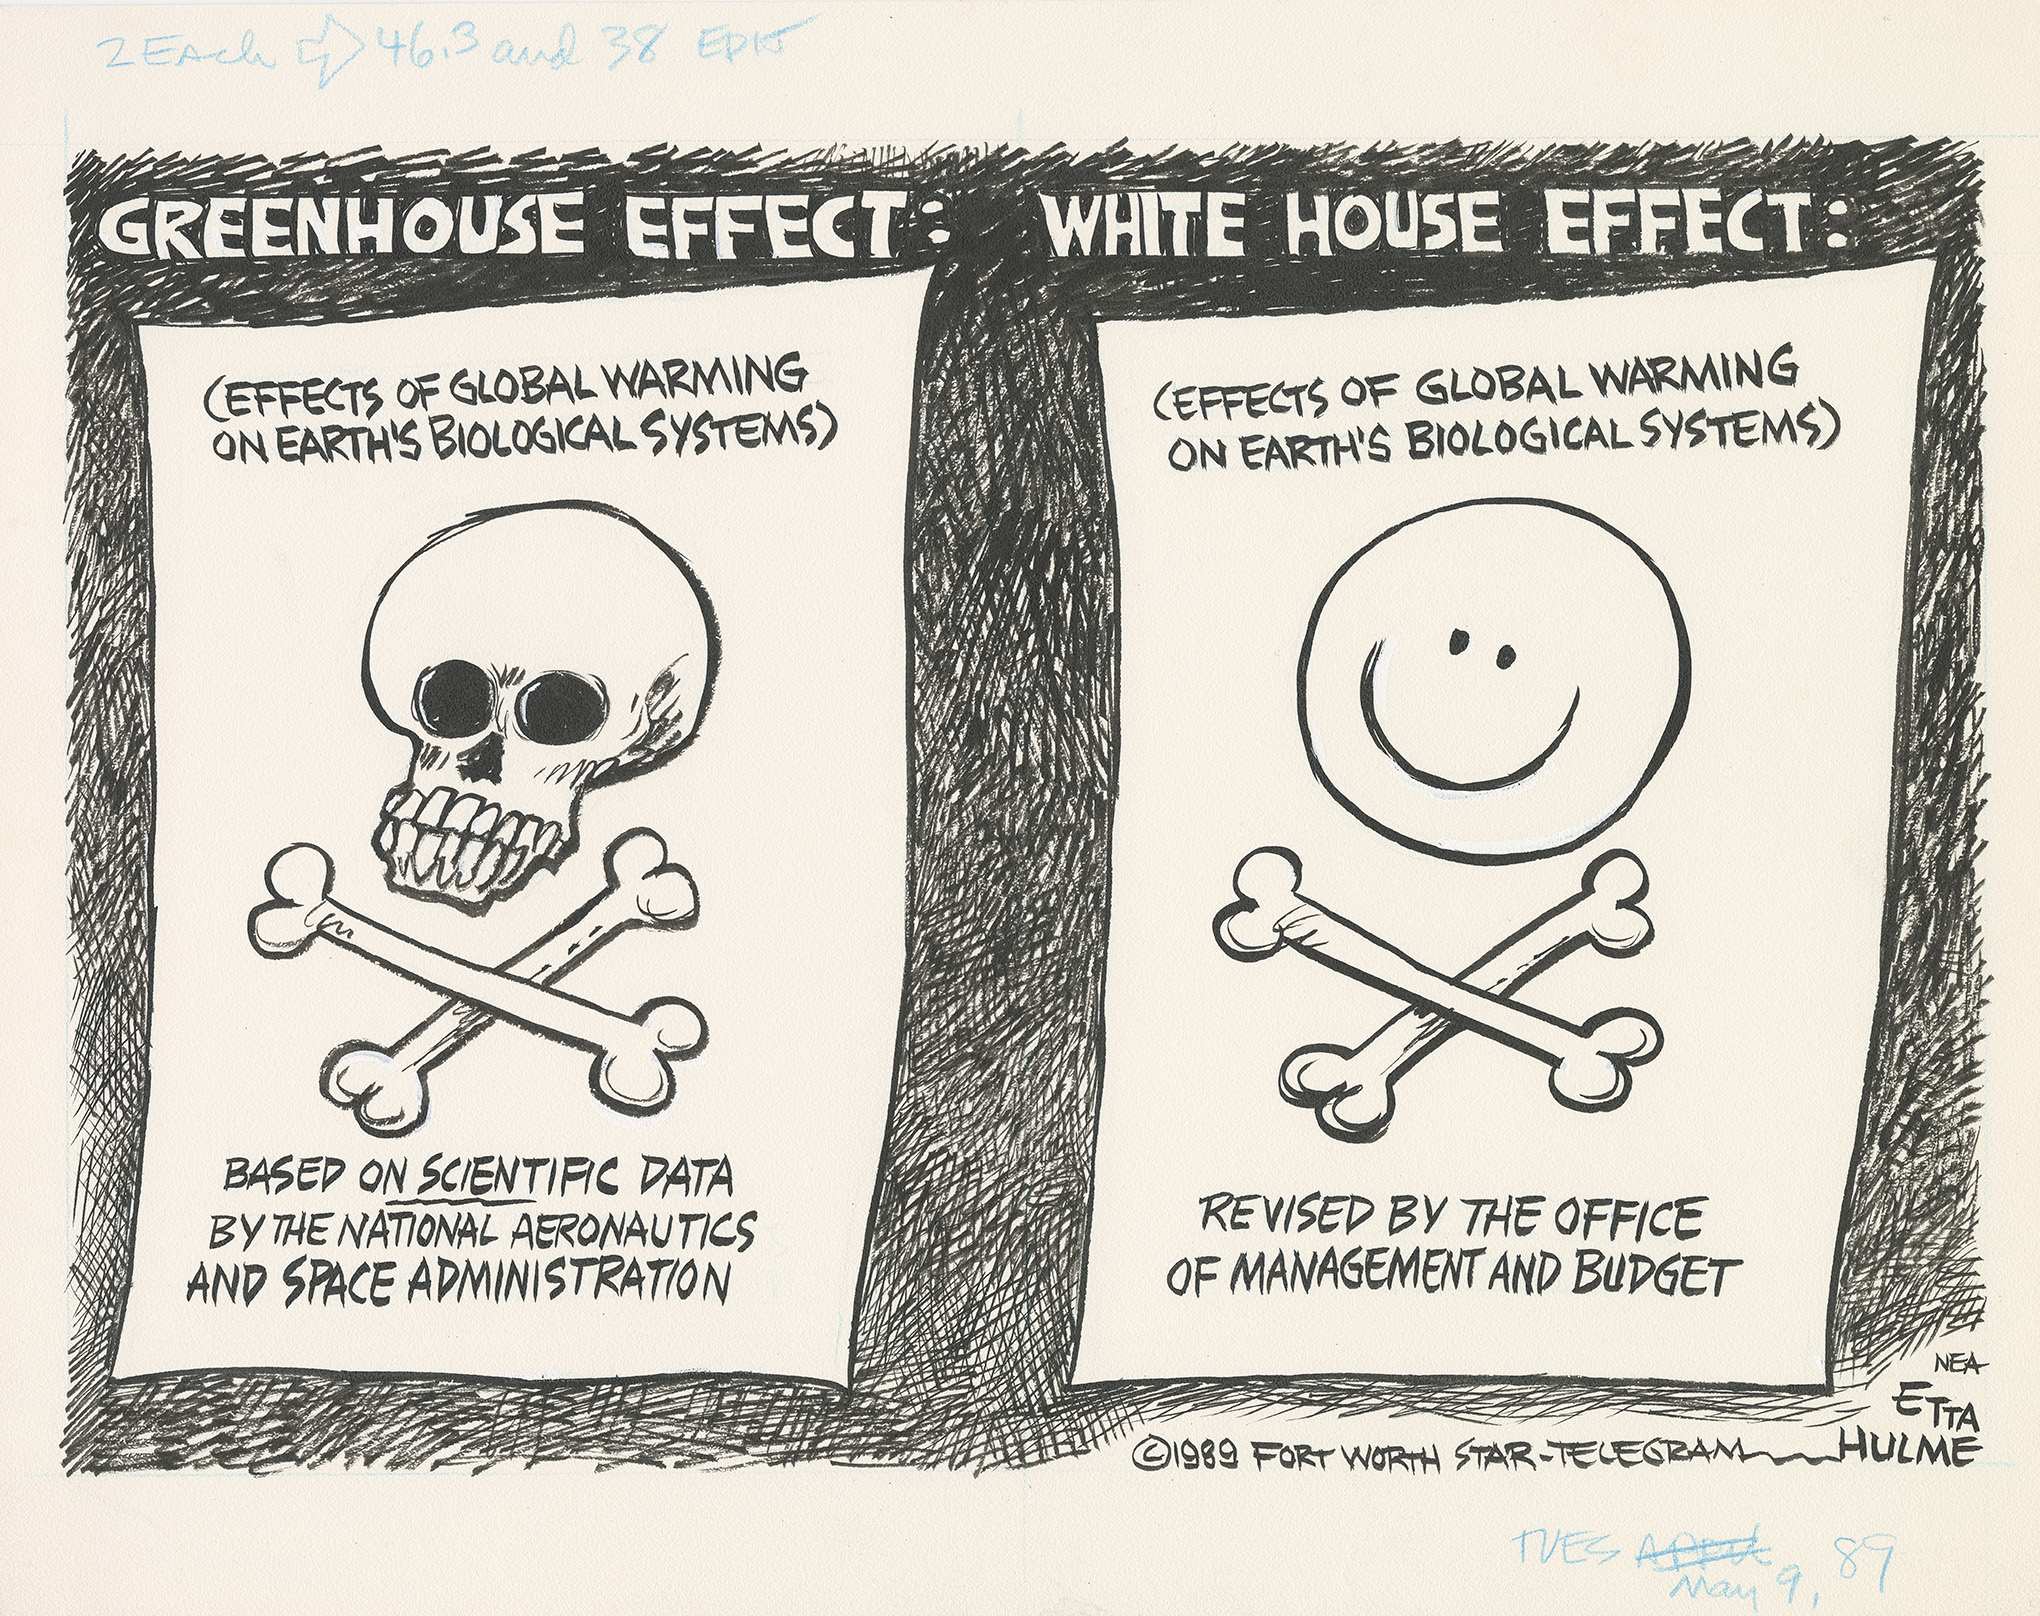 Greenhouse effect: White House Effect